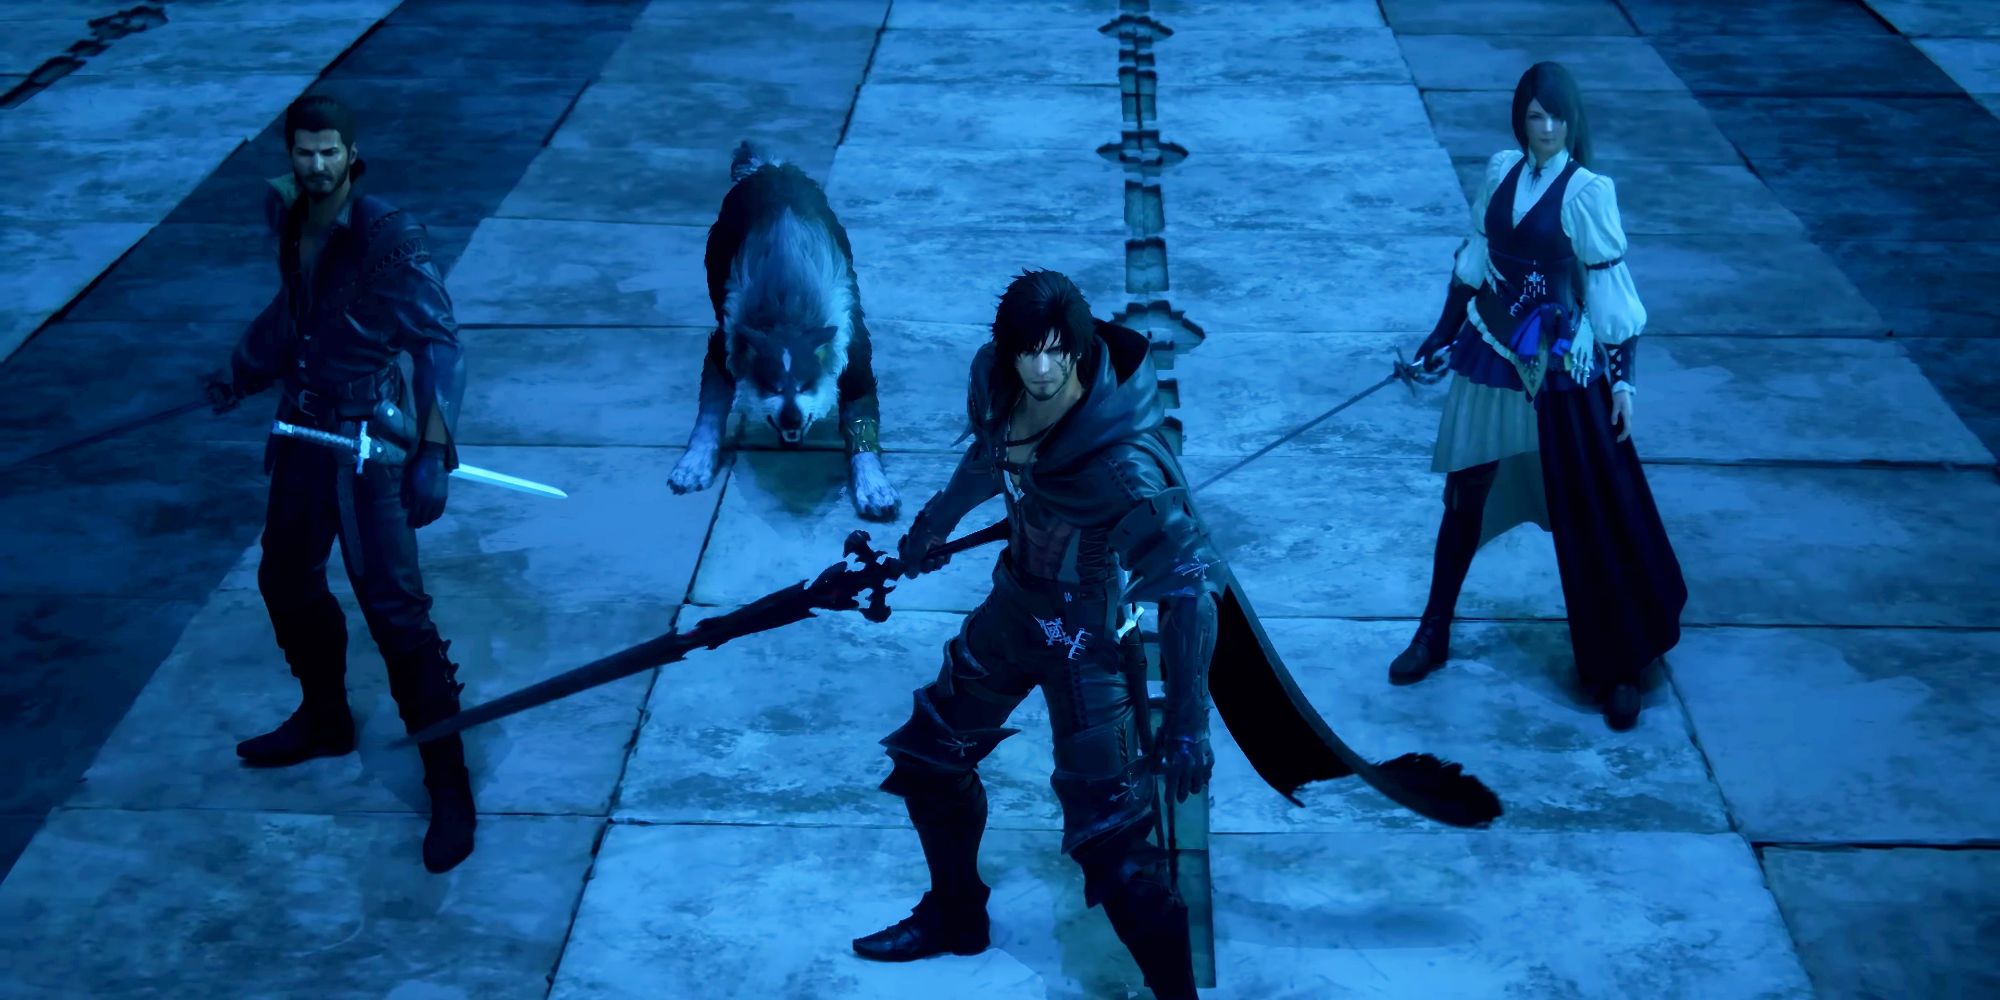 Clive Rosfield, Final Fantasy 16's protagonist, standing with his sword drawn next to his dog companion and two other characters.